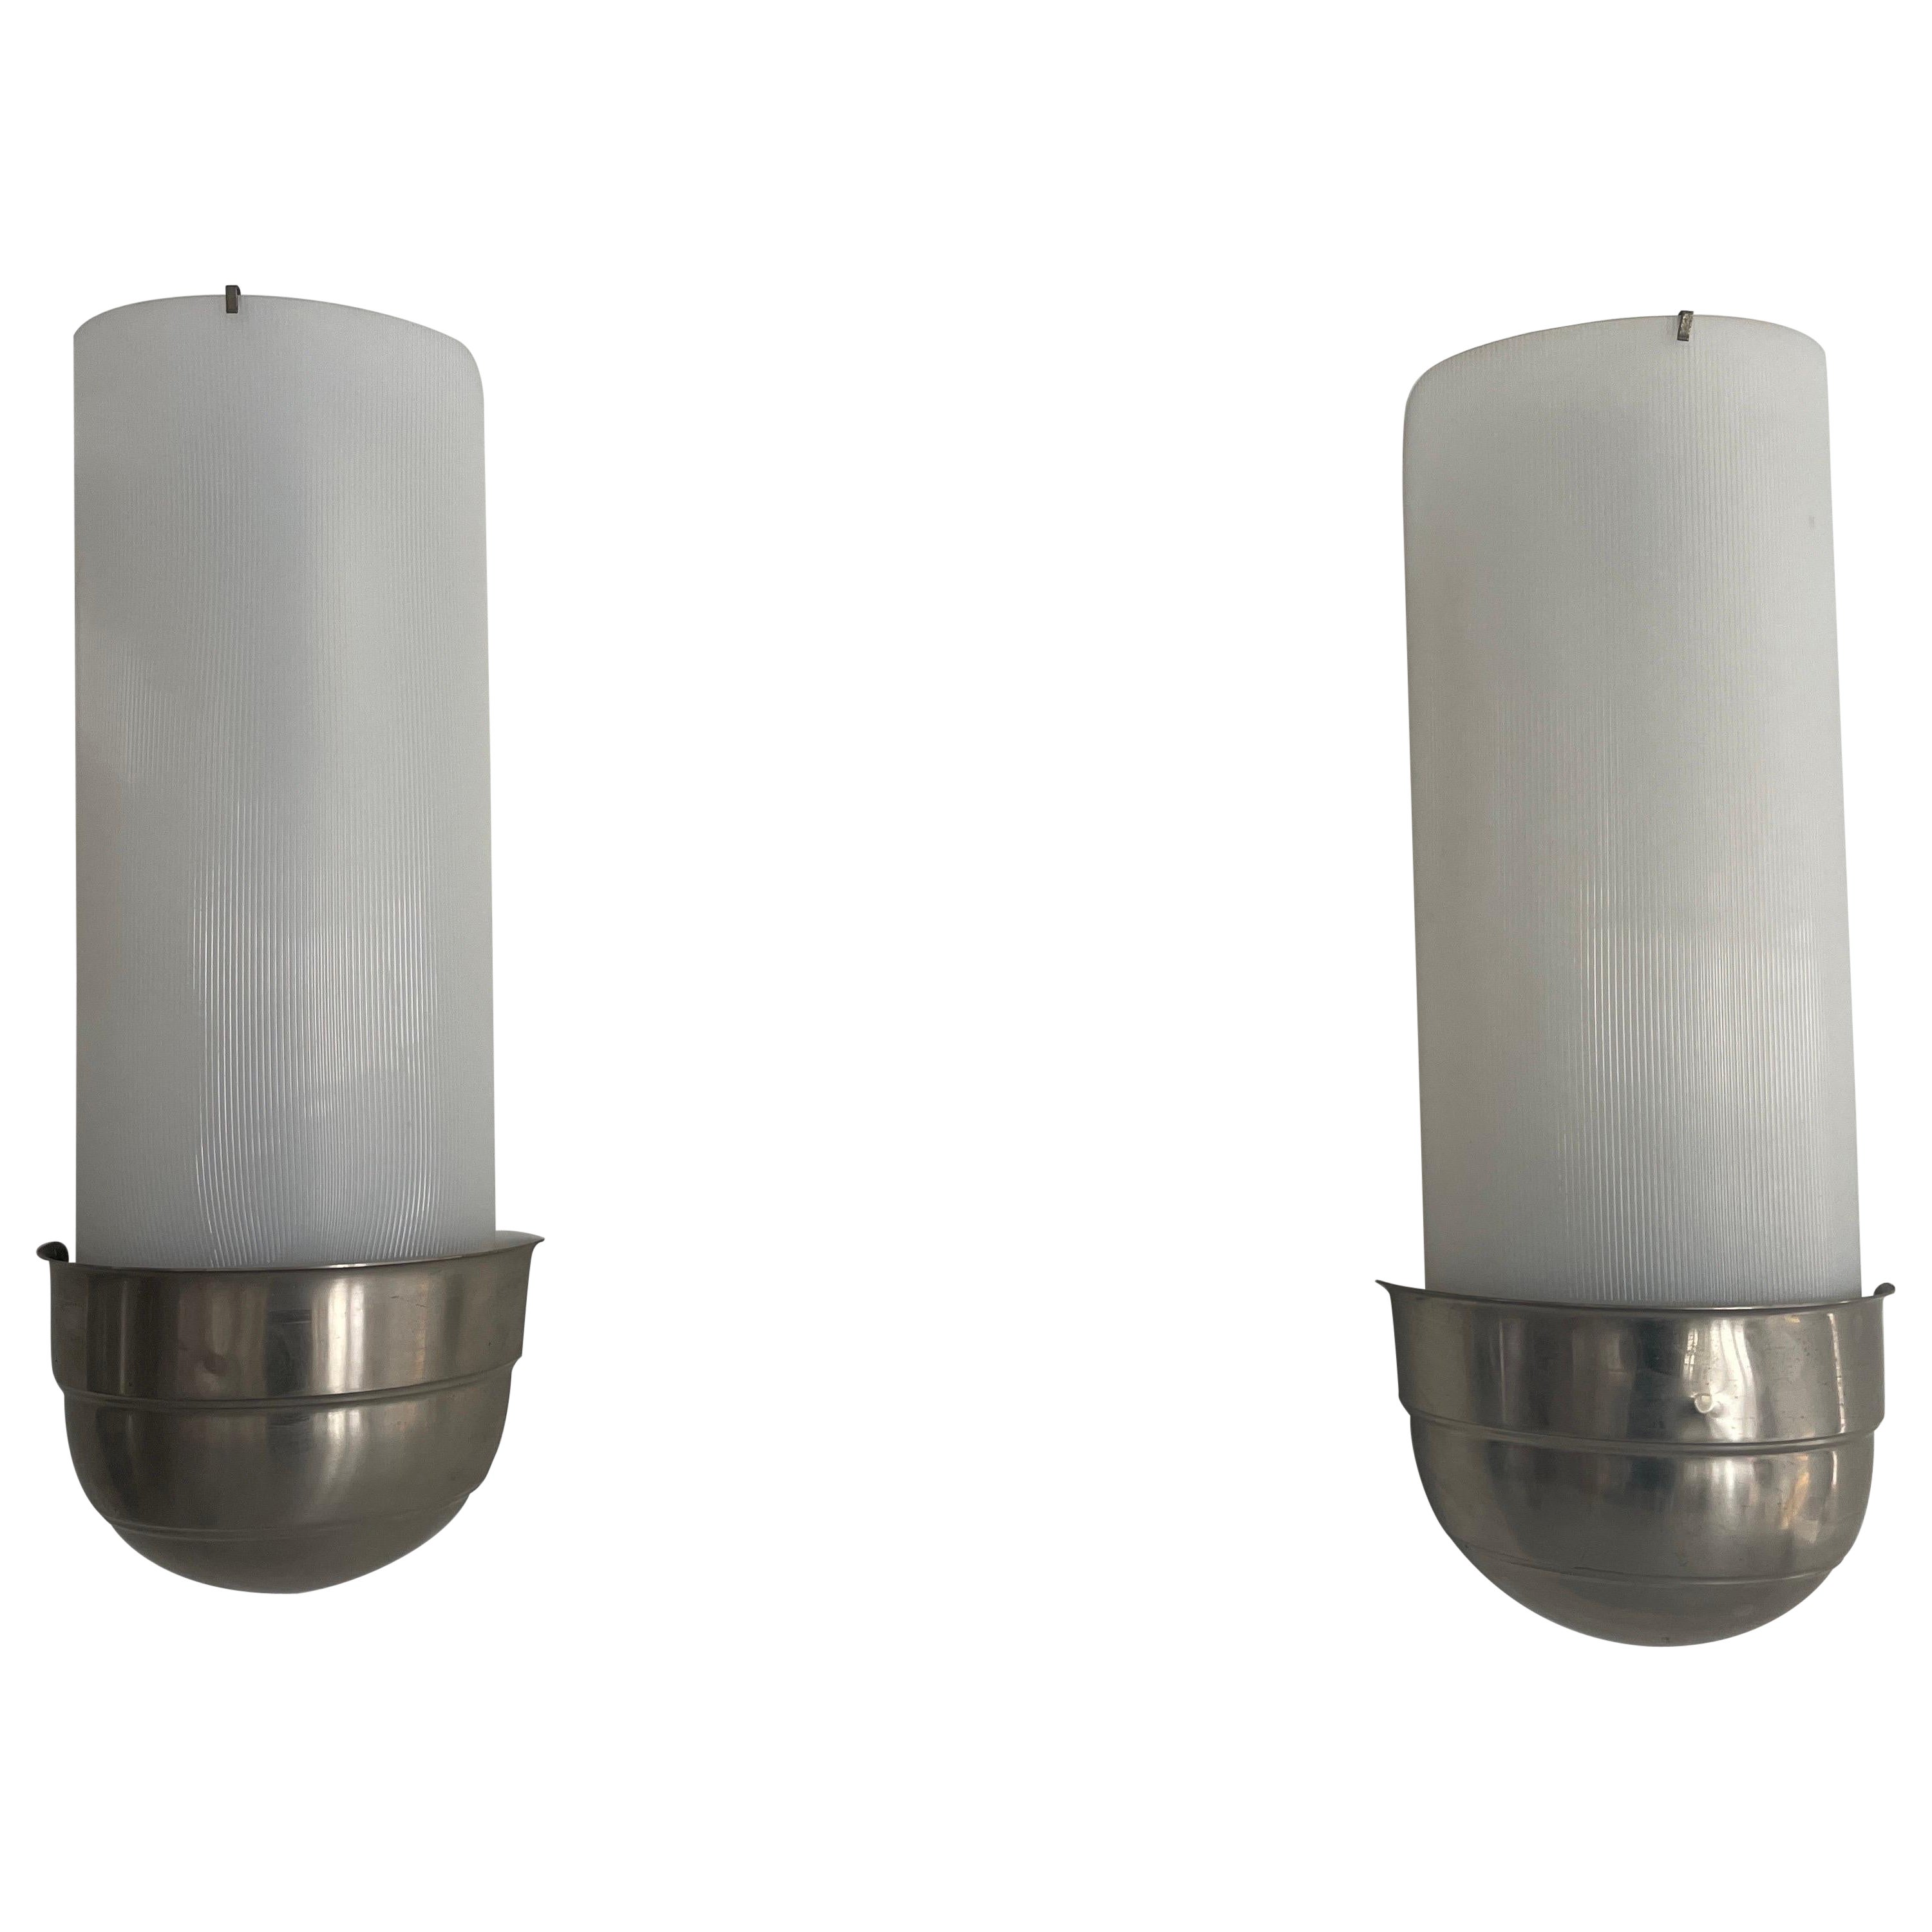 Art Deco Pair of Cinema Sconces, 1940s, Germany For Sale